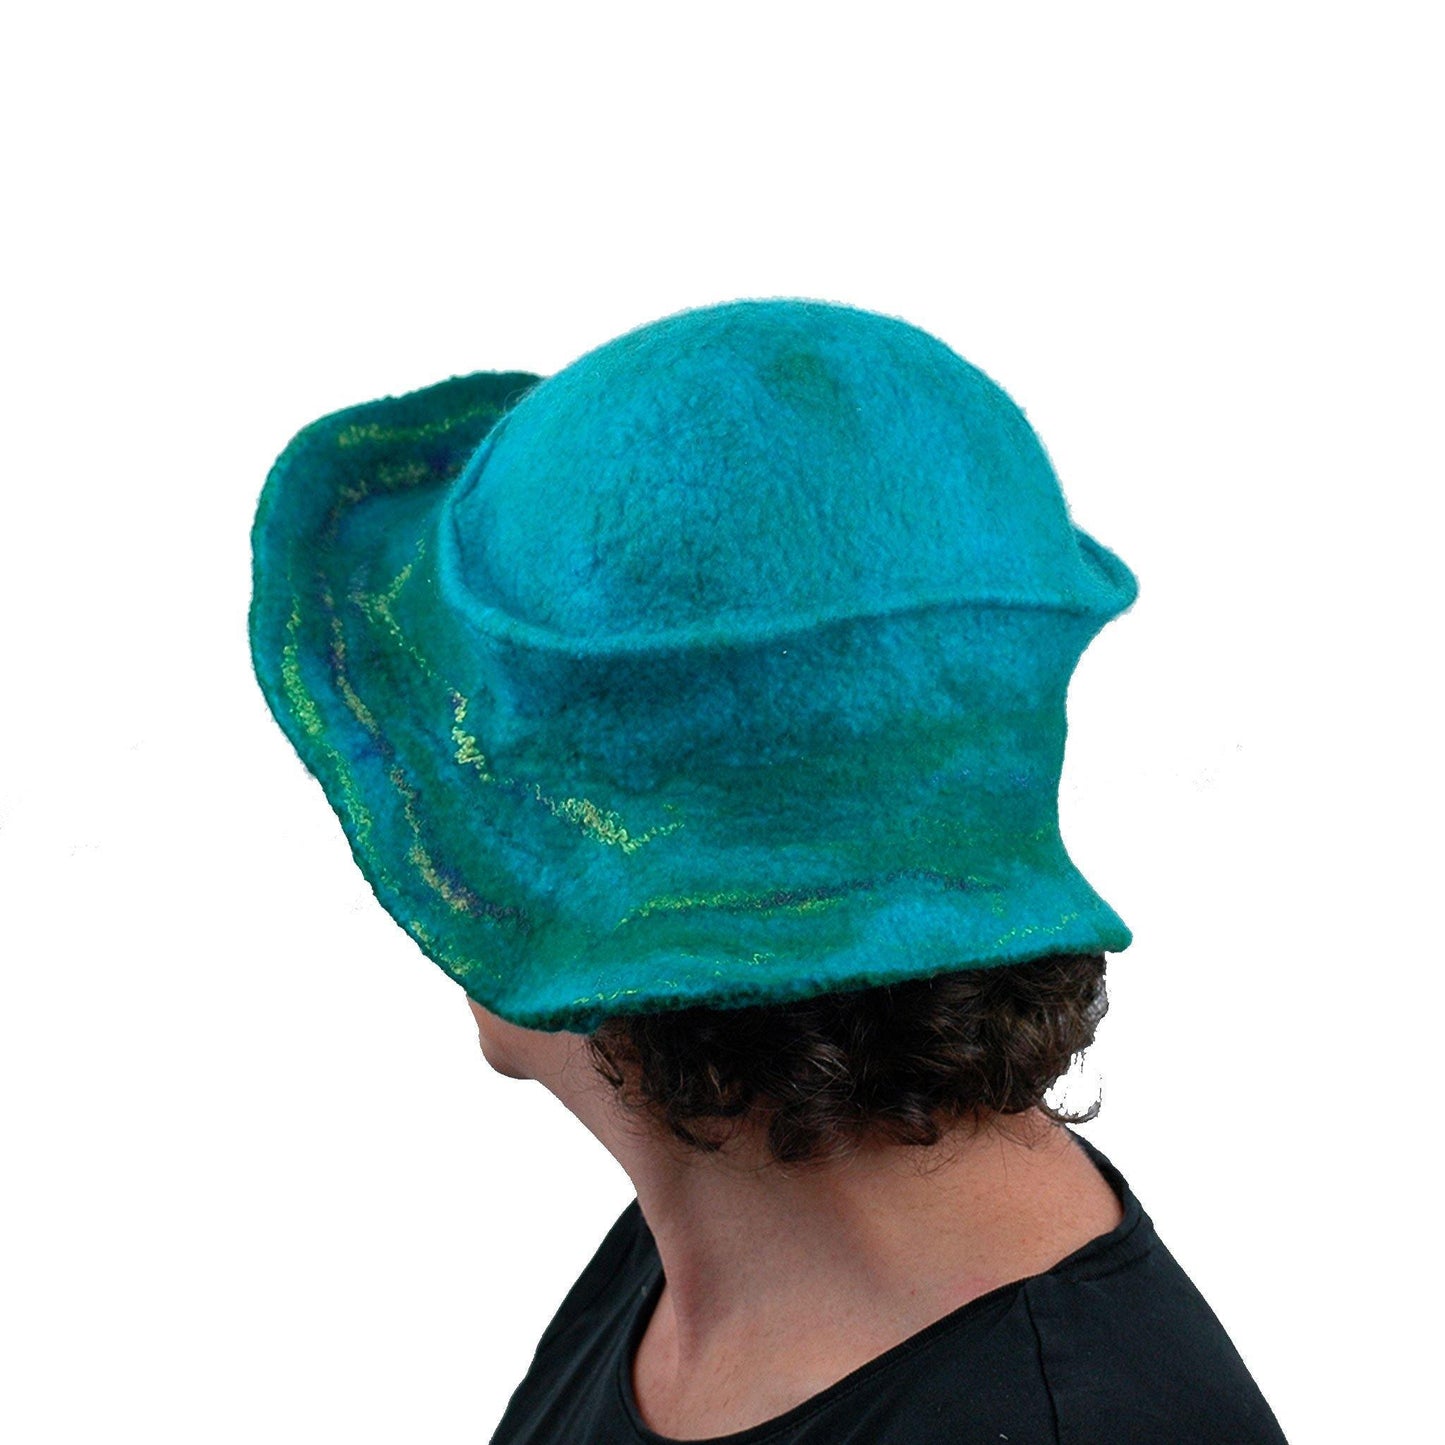 Peacock Inspired Fedora in Turquoise Blue - back view